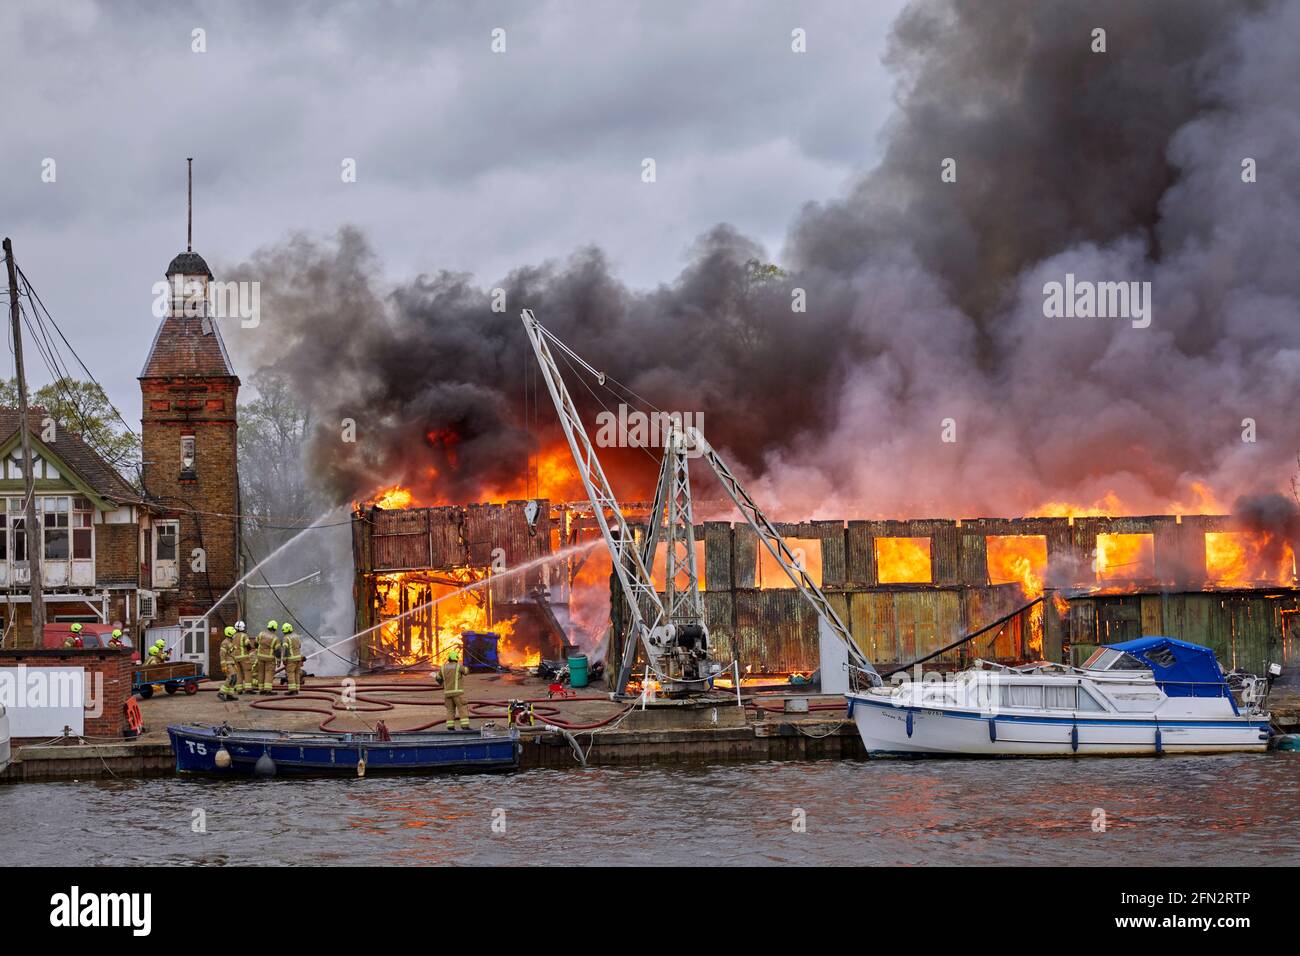 Fire brigade at the Platt's Eyot fire of 3 May 2021 which destroyed the boat shed of Otter Marine and the Dunkirk evacuation ship Lady Gay. The River Stock Photo